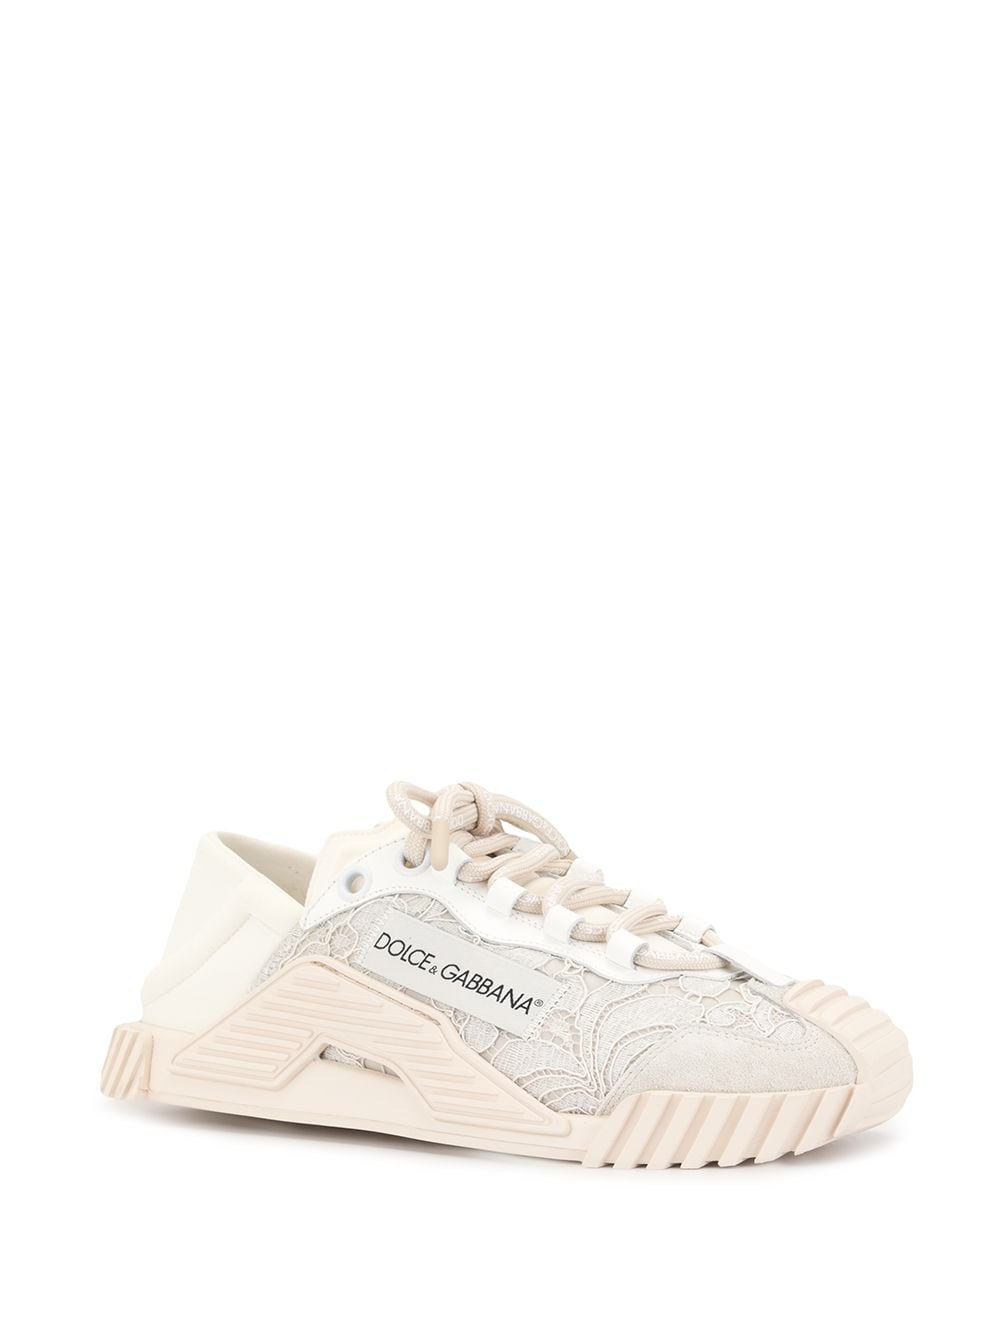 Image 2 of Dolce & Gabbana NS1 low-top sneakers